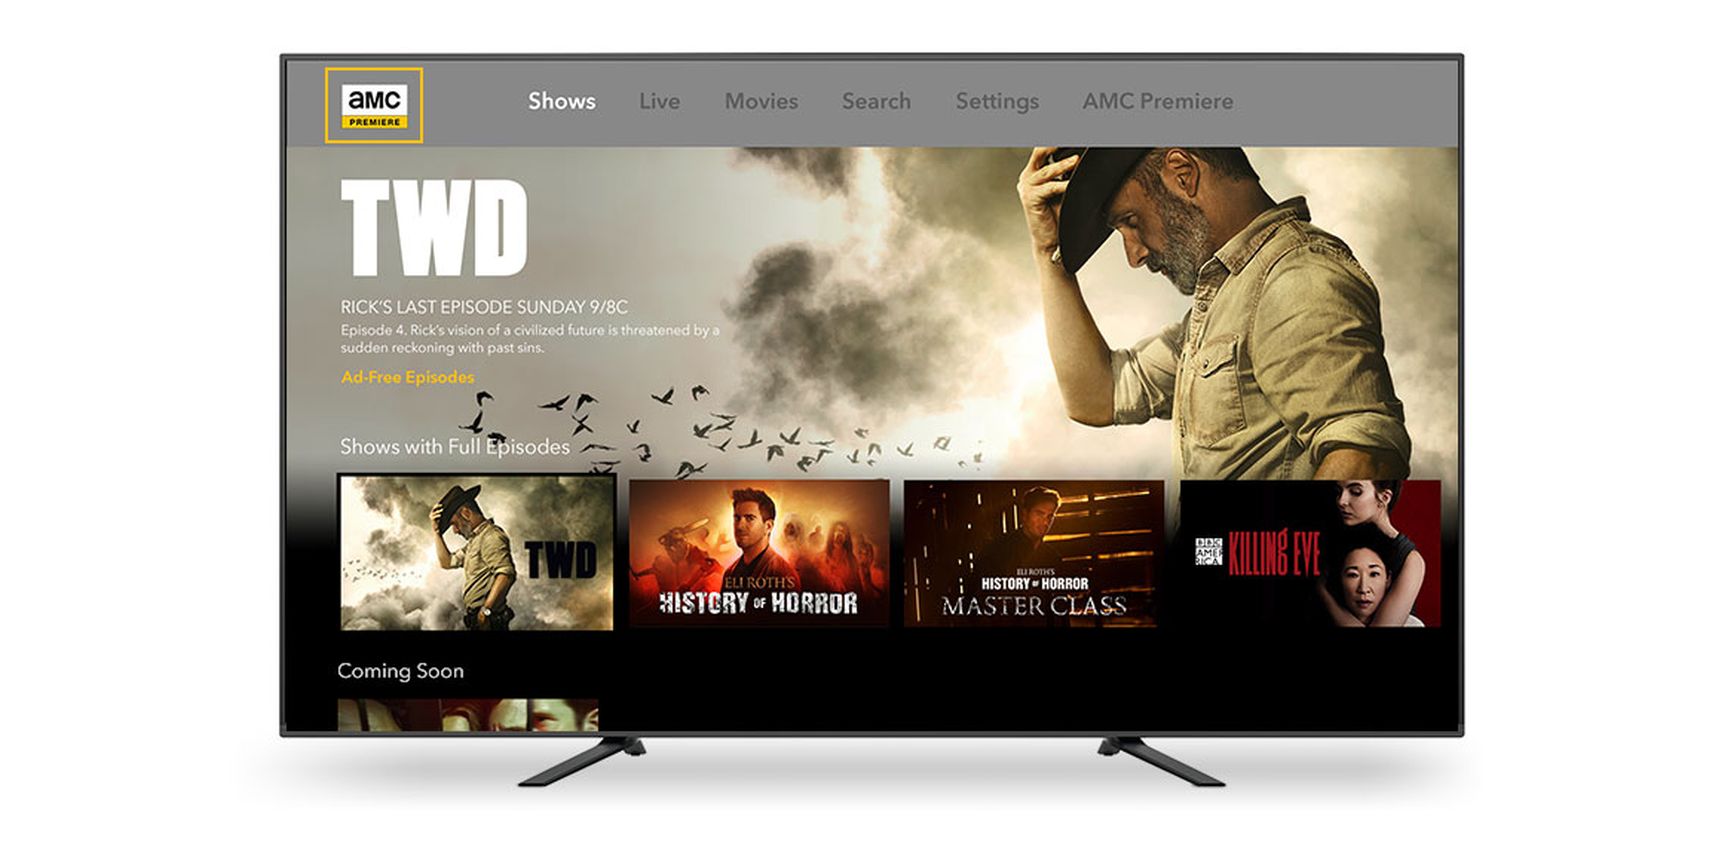 How To Get Amc Plus On Smart TV